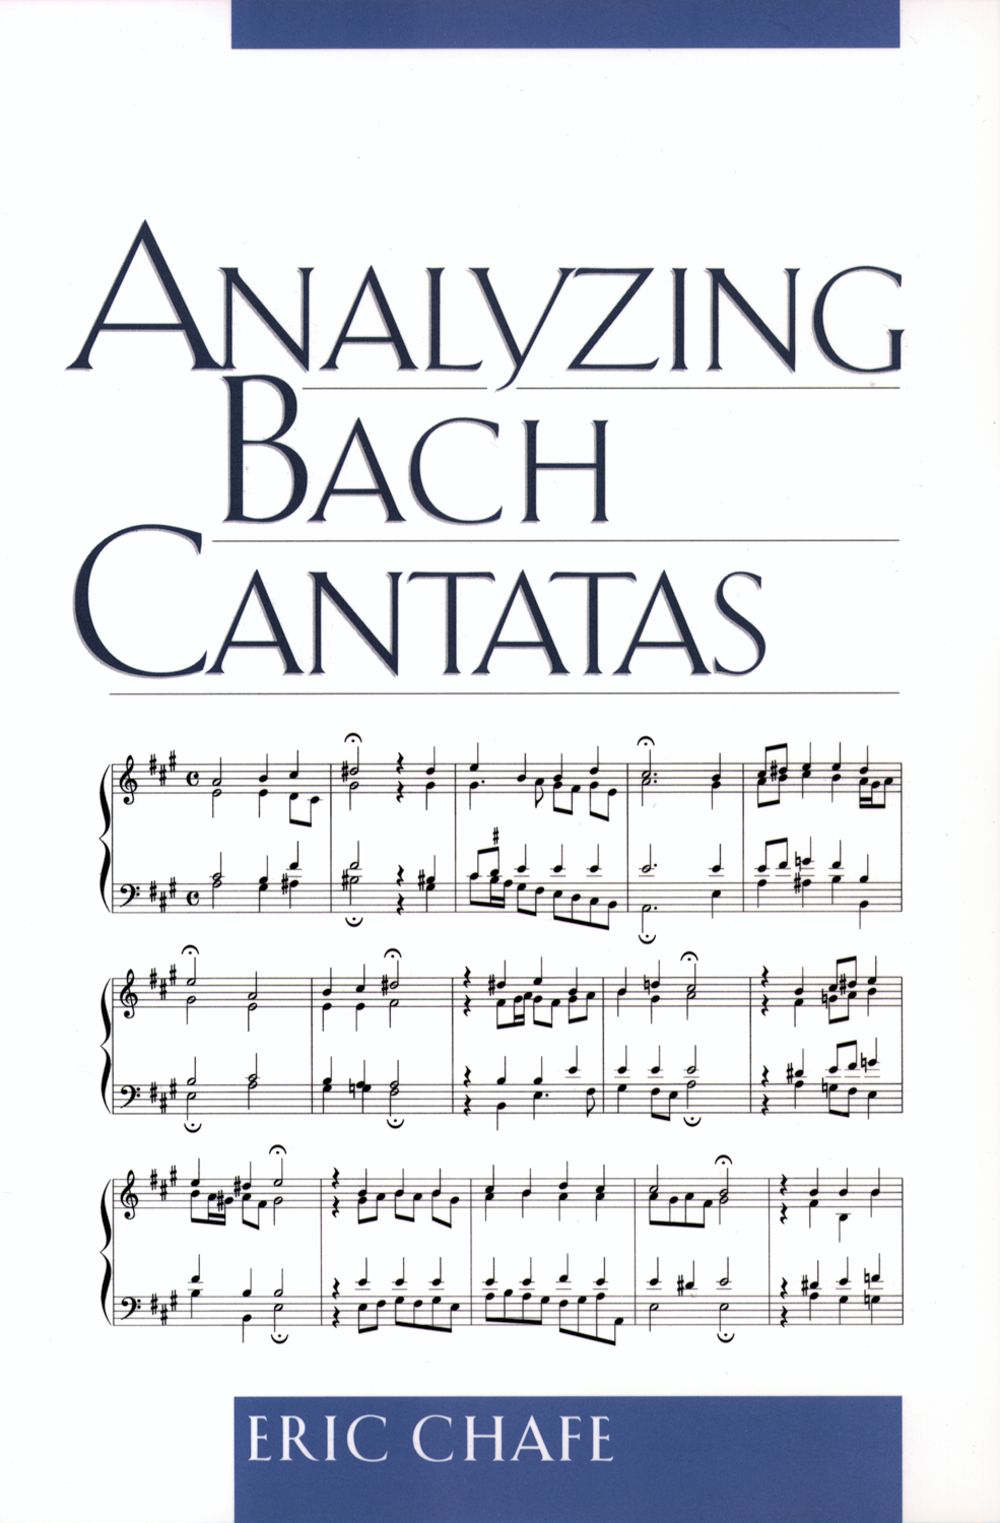 Chafe Analyzing Bach Cantatas Paperback Sheet Music Songbook